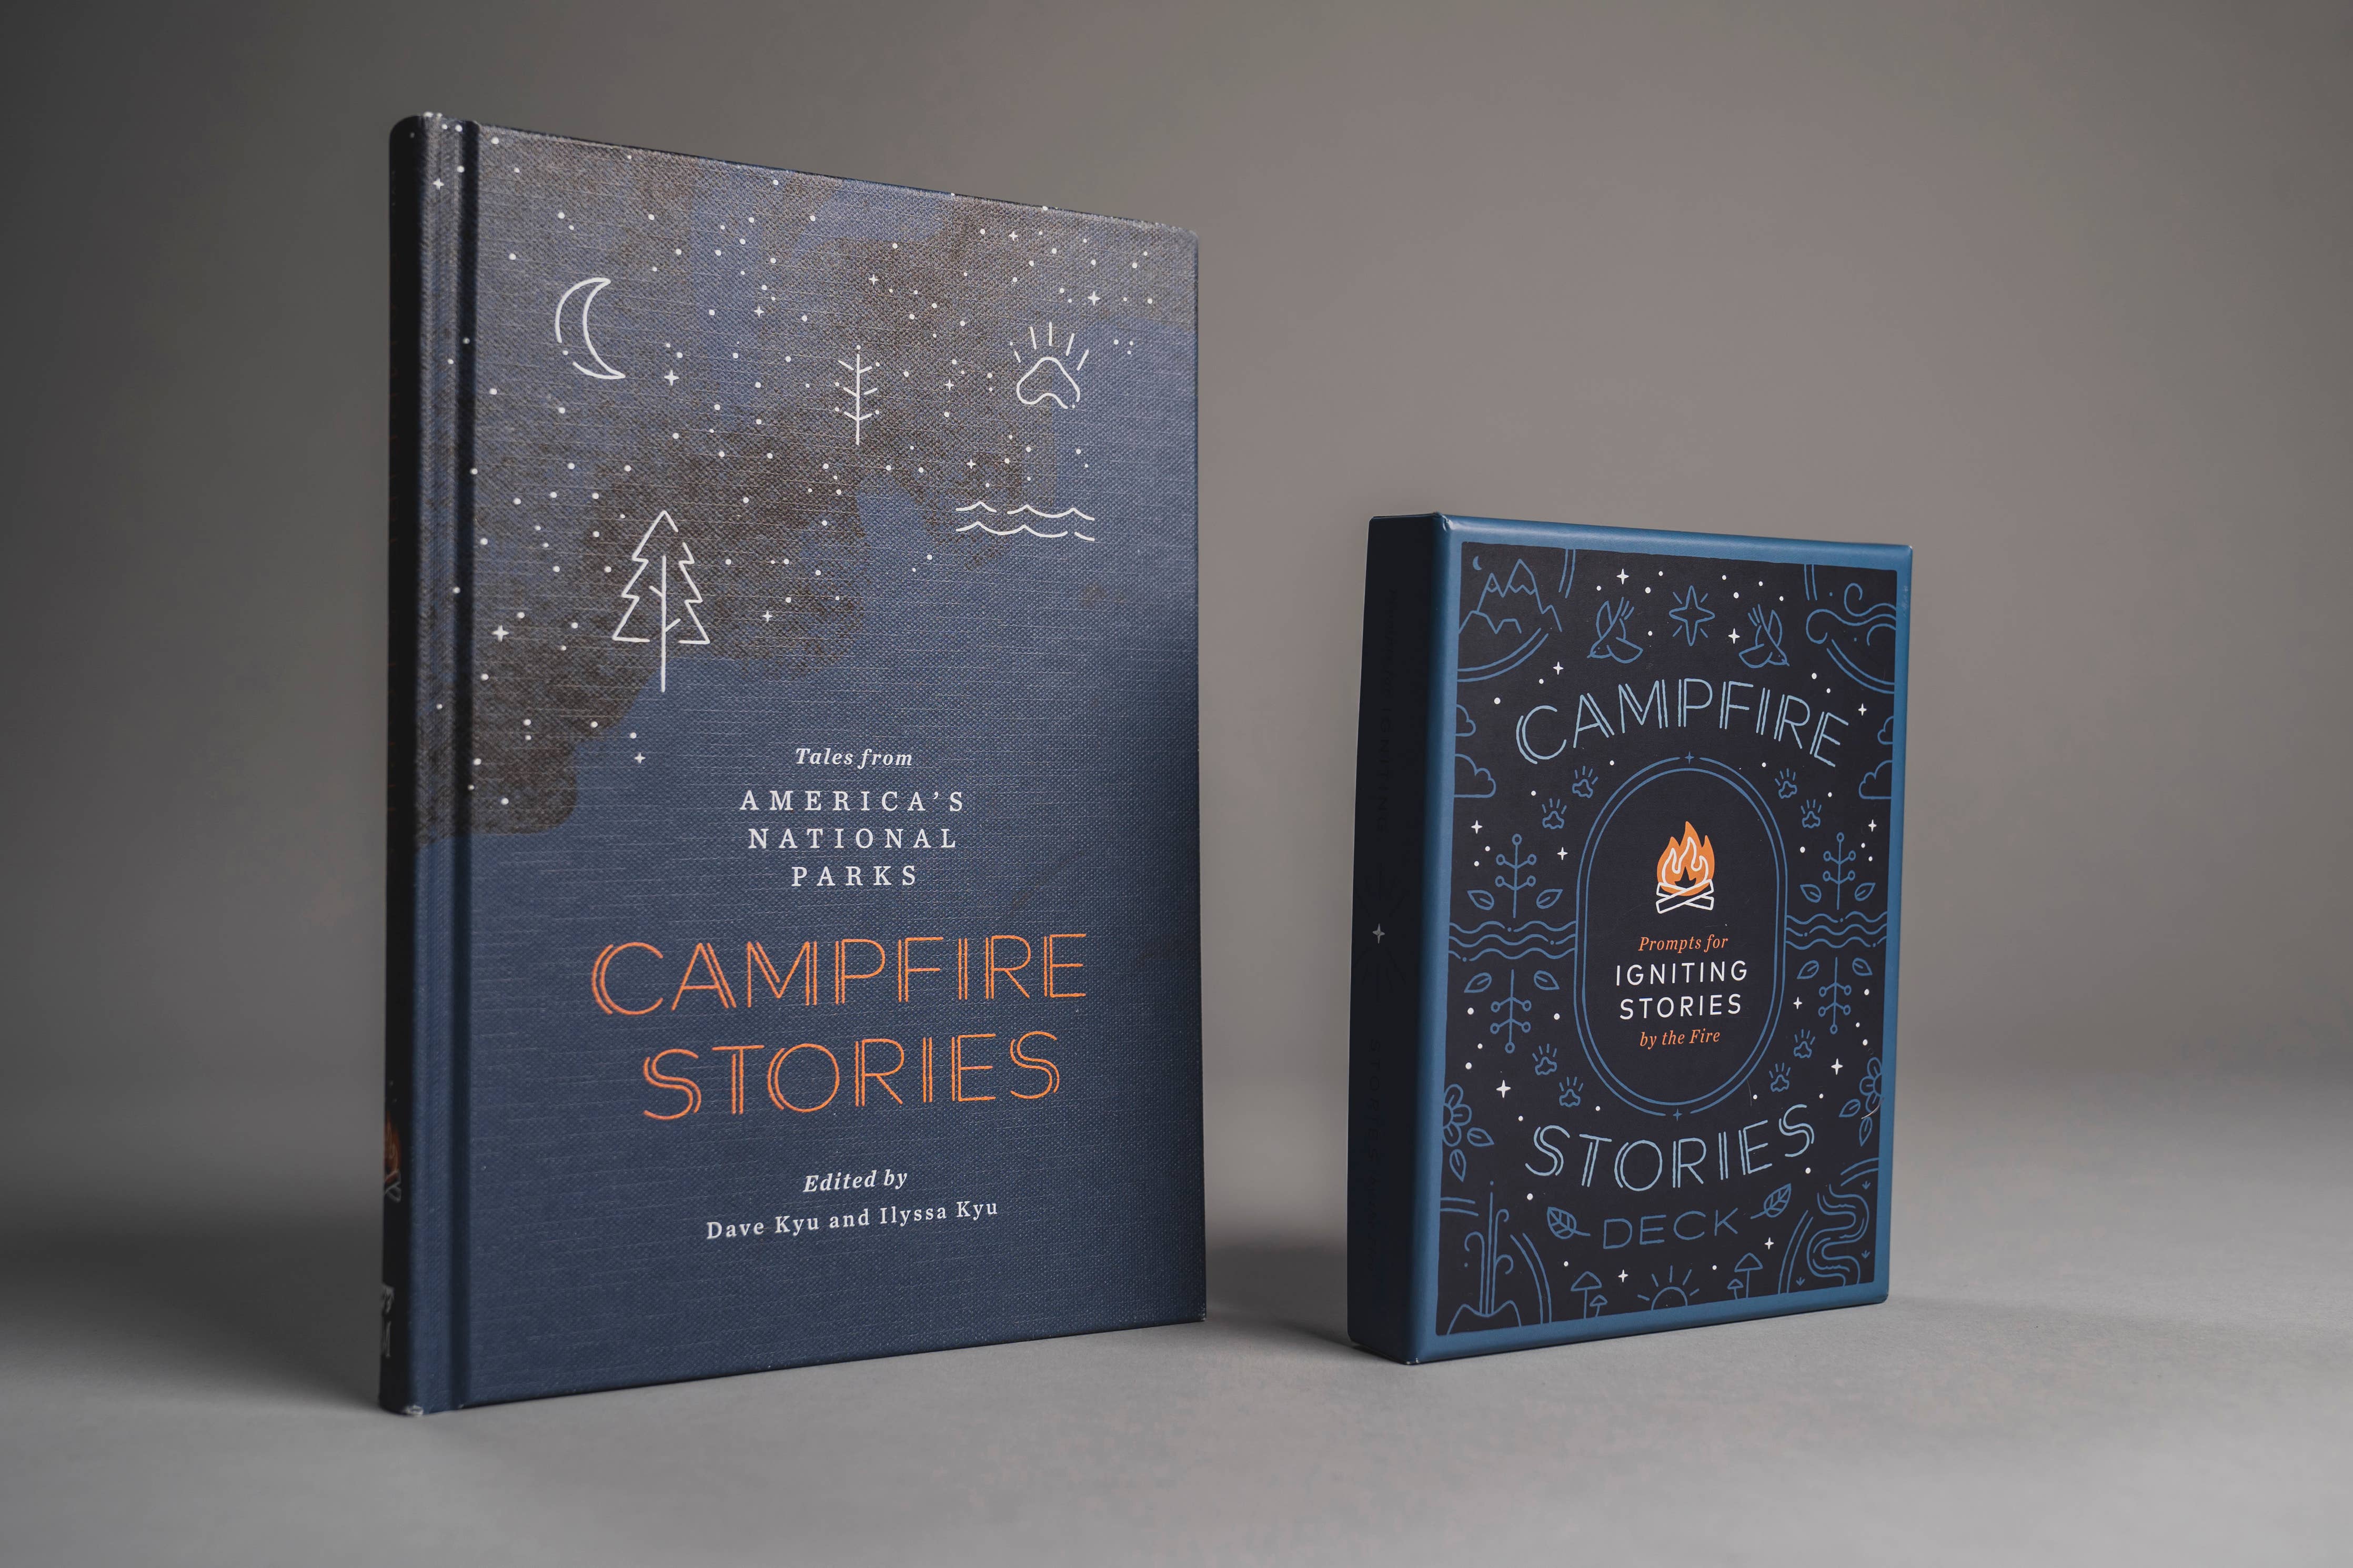 Campfire Stories - Tales from America's National Parks